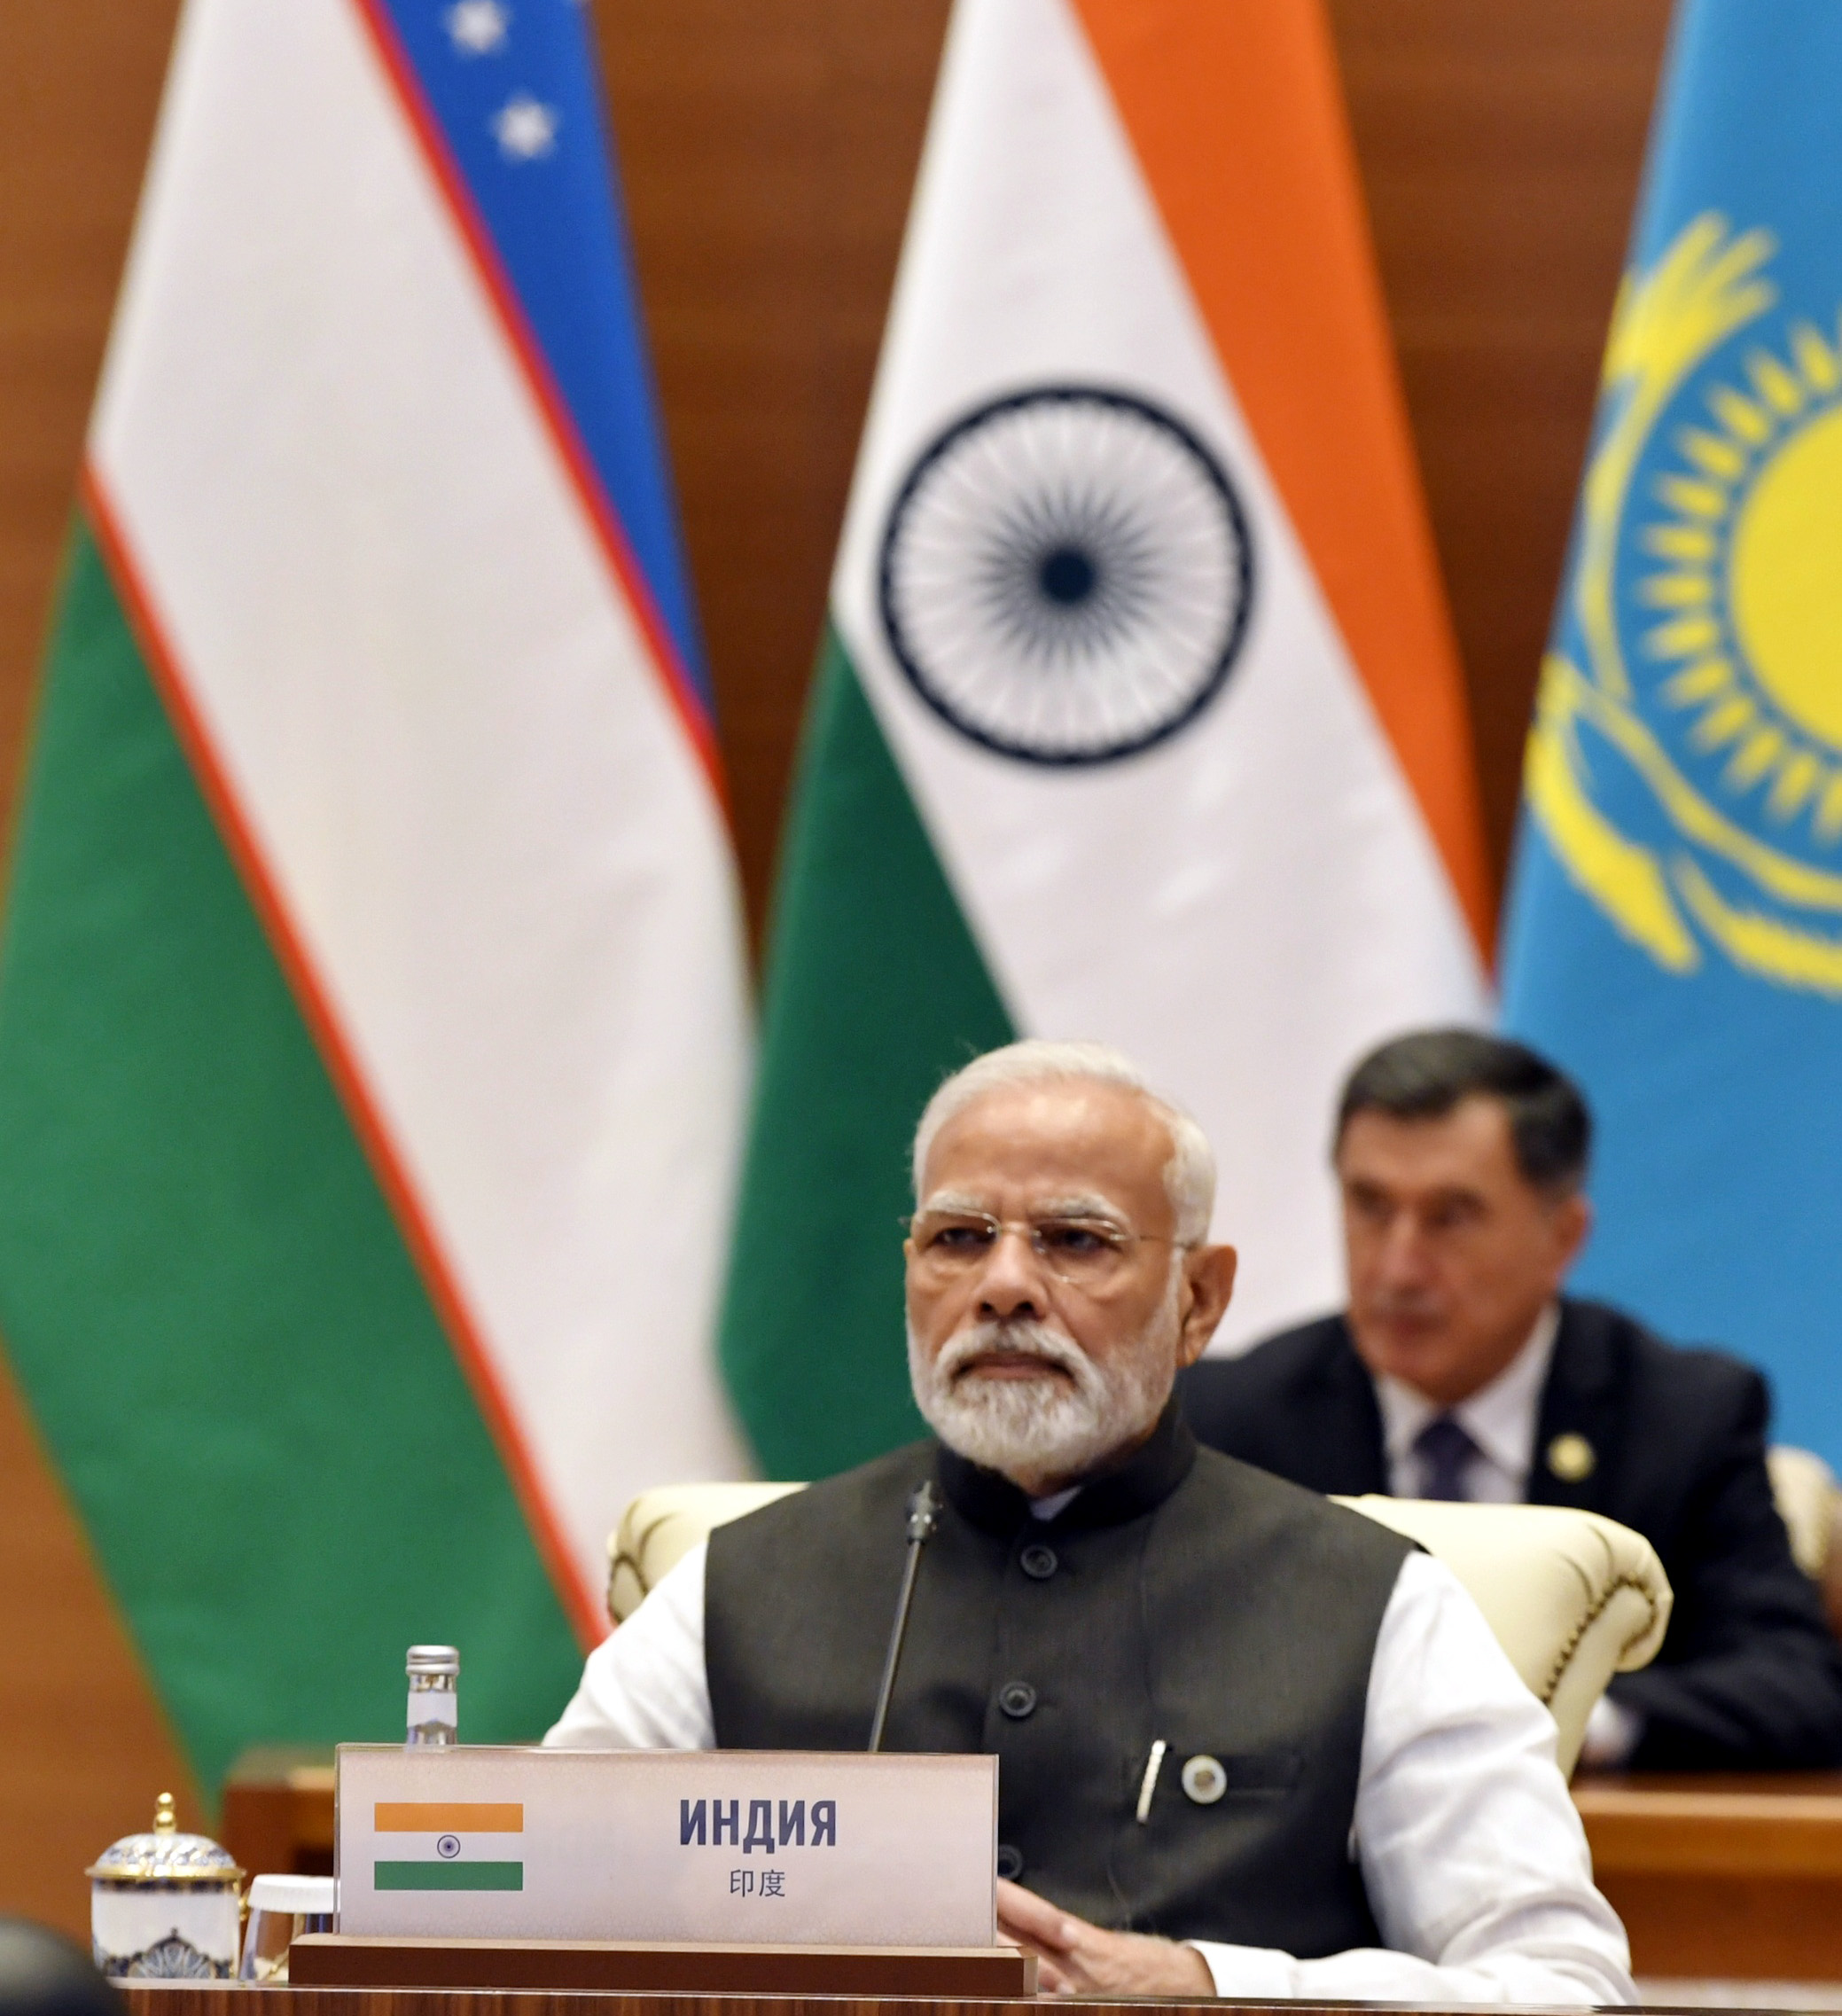 PM attends the 22nd Meeting of the Council of Heads of State of the Shanghai Cooperation Organization (SCO), in Samarkand, Uzbekistan on September 16, 2022.